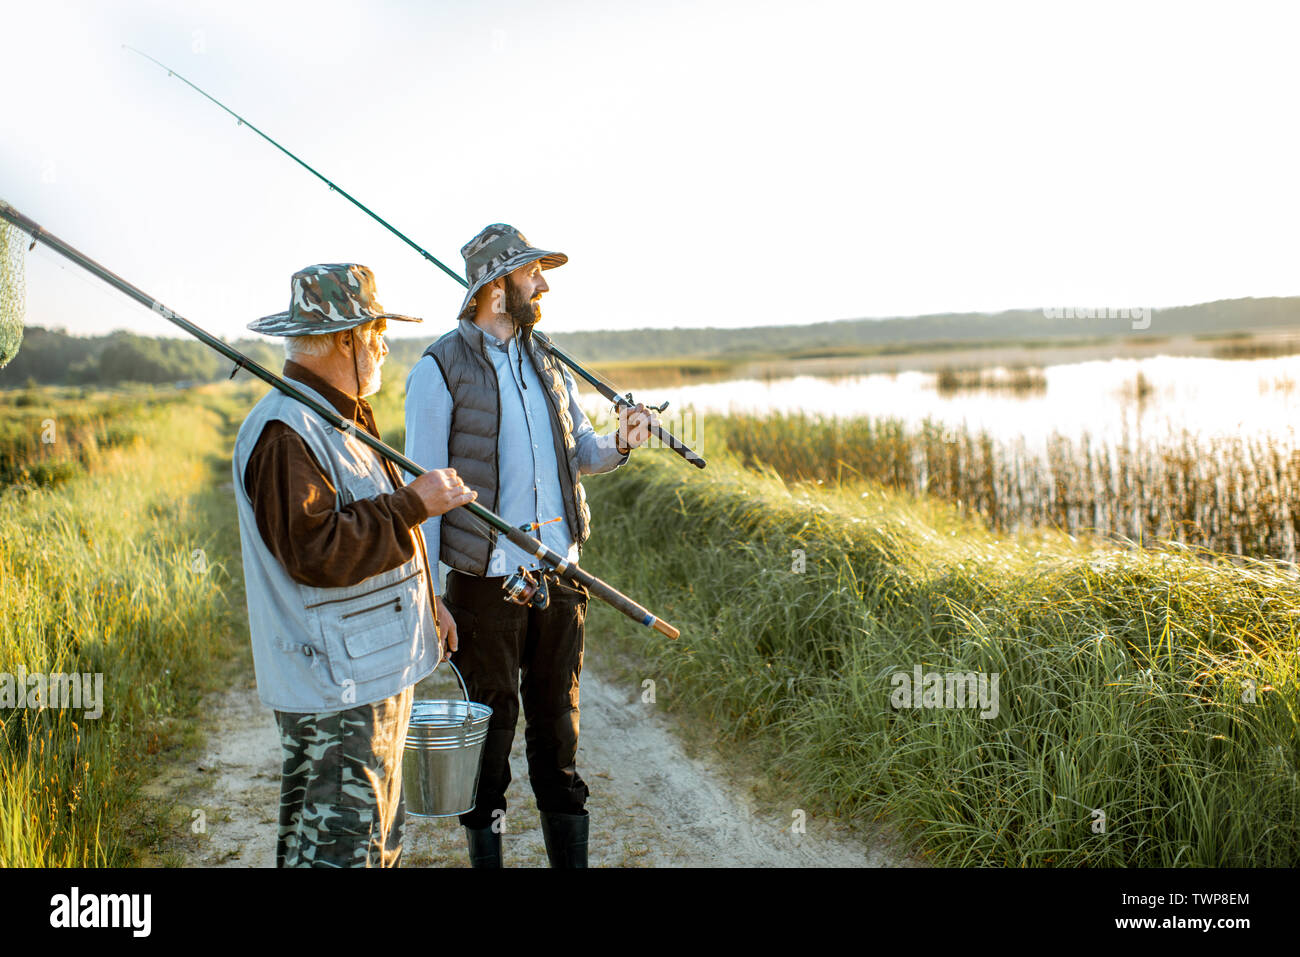 https://c8.alamy.com/comp/TWP8EM/grandfather-with-adult-son-walking-with-fishing-gear-on-the-footpath-near-the-lake-during-the-morning-light-TWP8EM.jpg